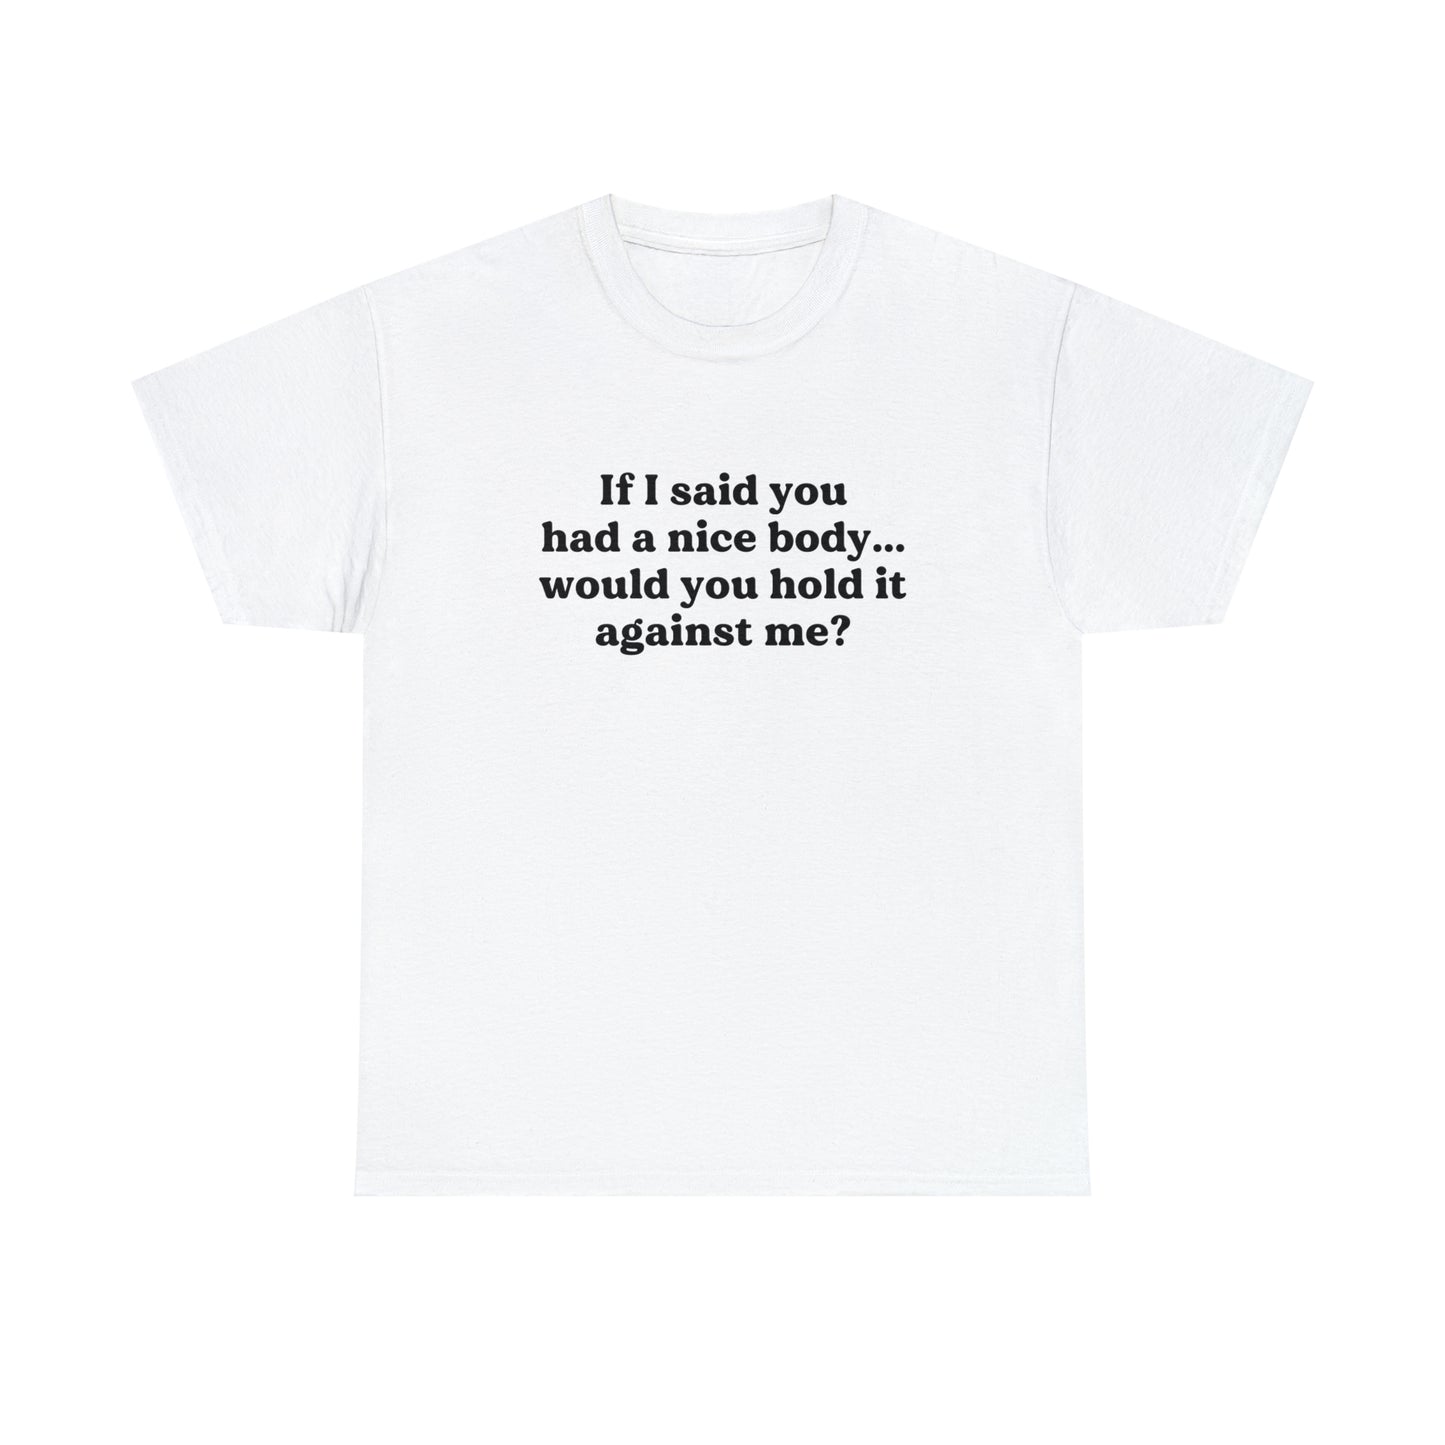 Would You Hold It Against Me T-Shirt